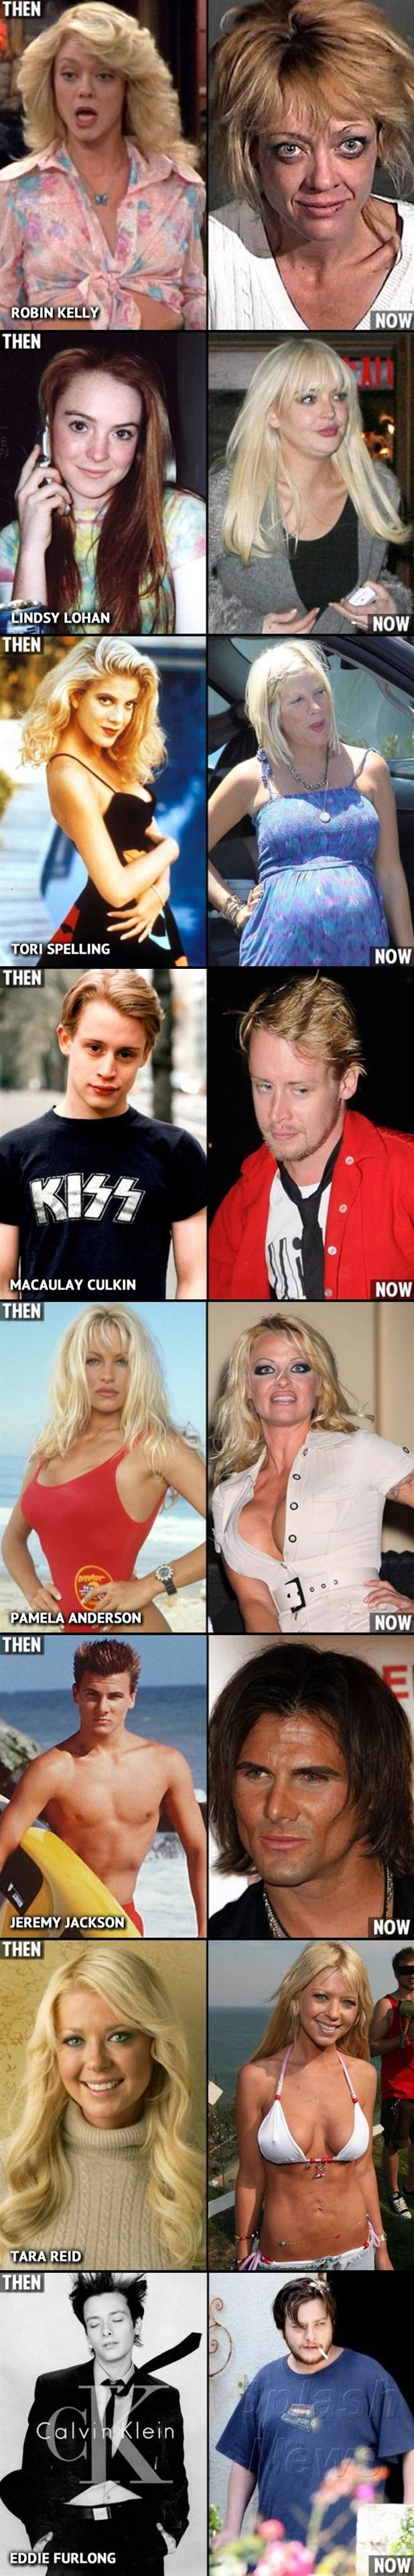 Teen stars then and now.